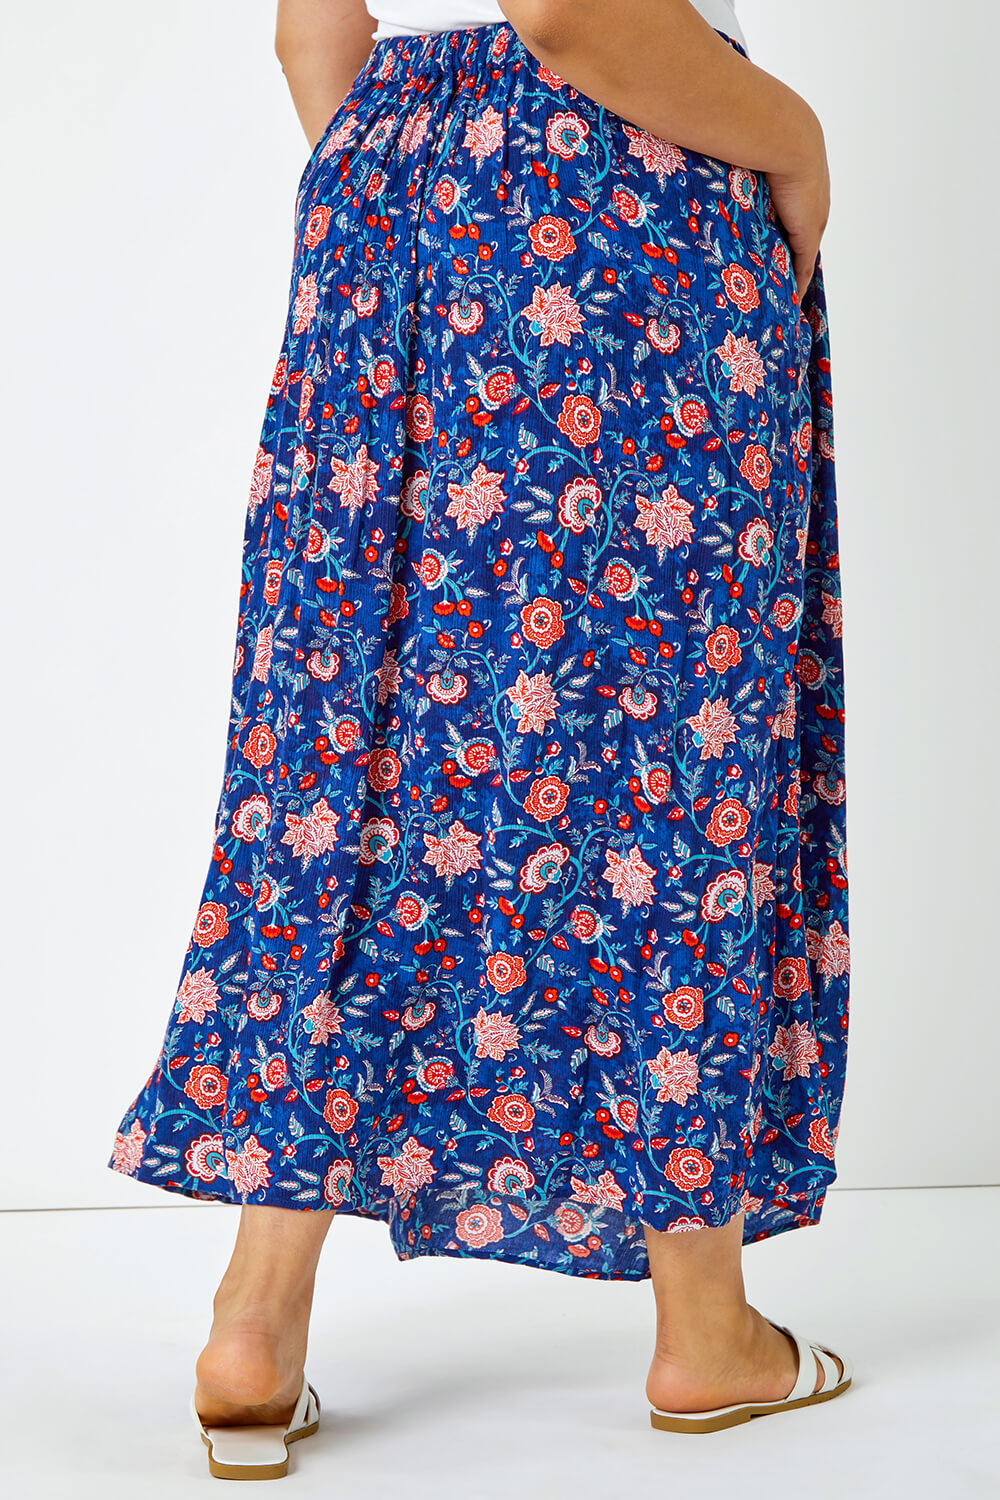 Blue Curve Floral Print Maxi Skirt, Image 3 of 5